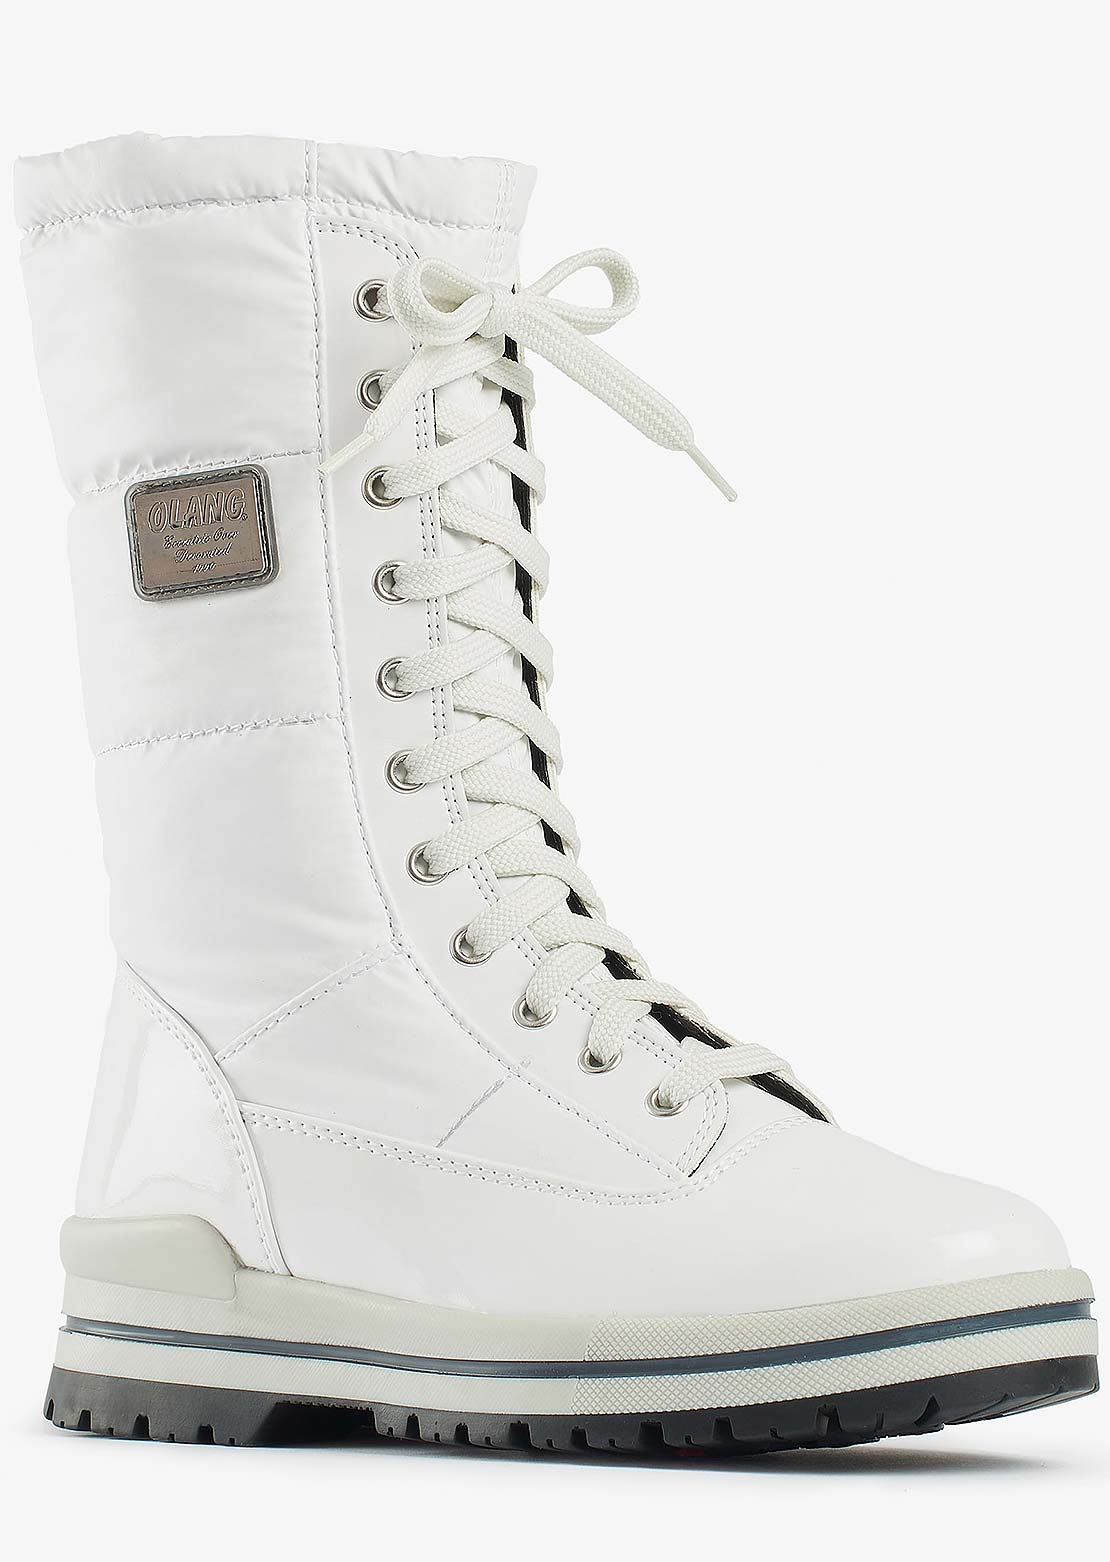 Olang Women&#39;s Glamour Winter Boots Bianco